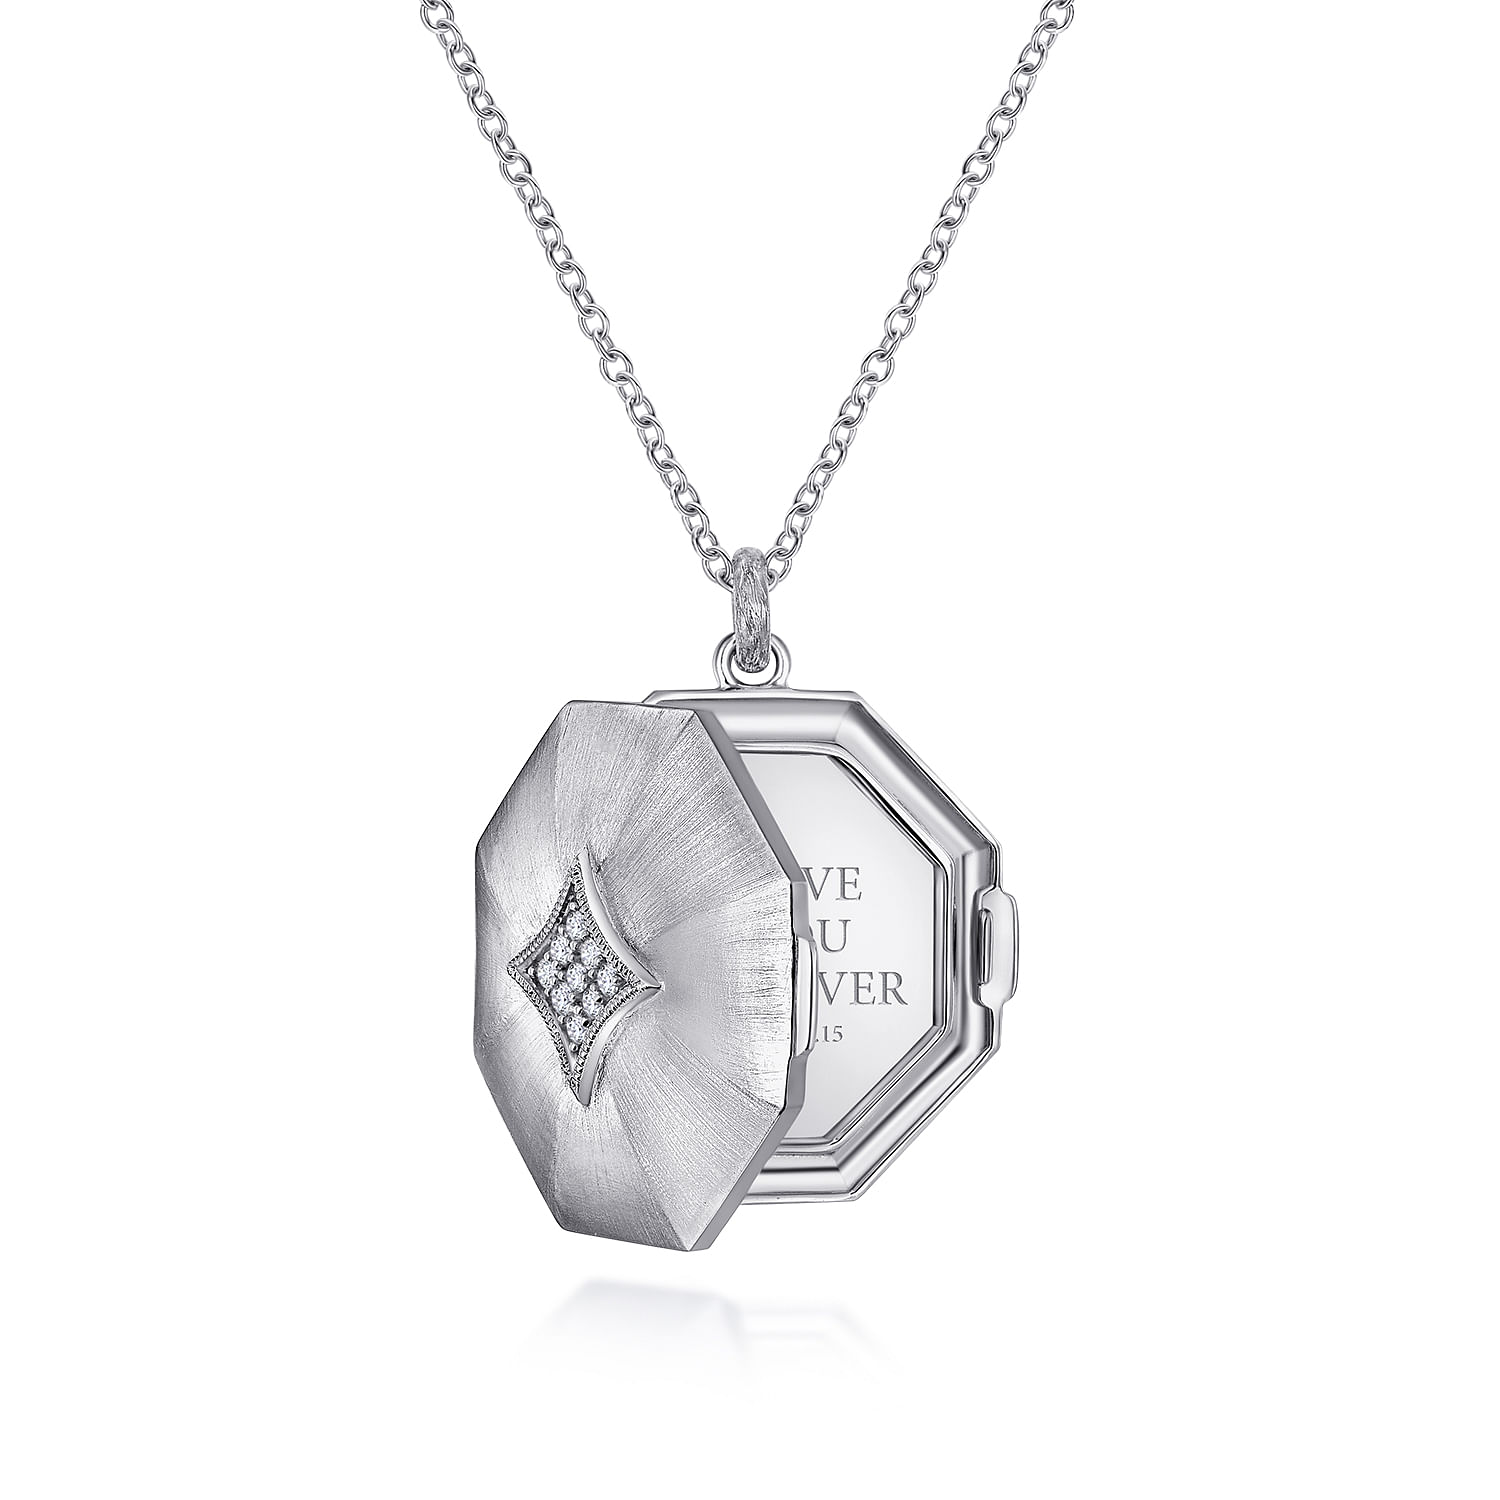 25 inch 925 Sterling Silver Octagonal Locket Necklace with White Sapphire